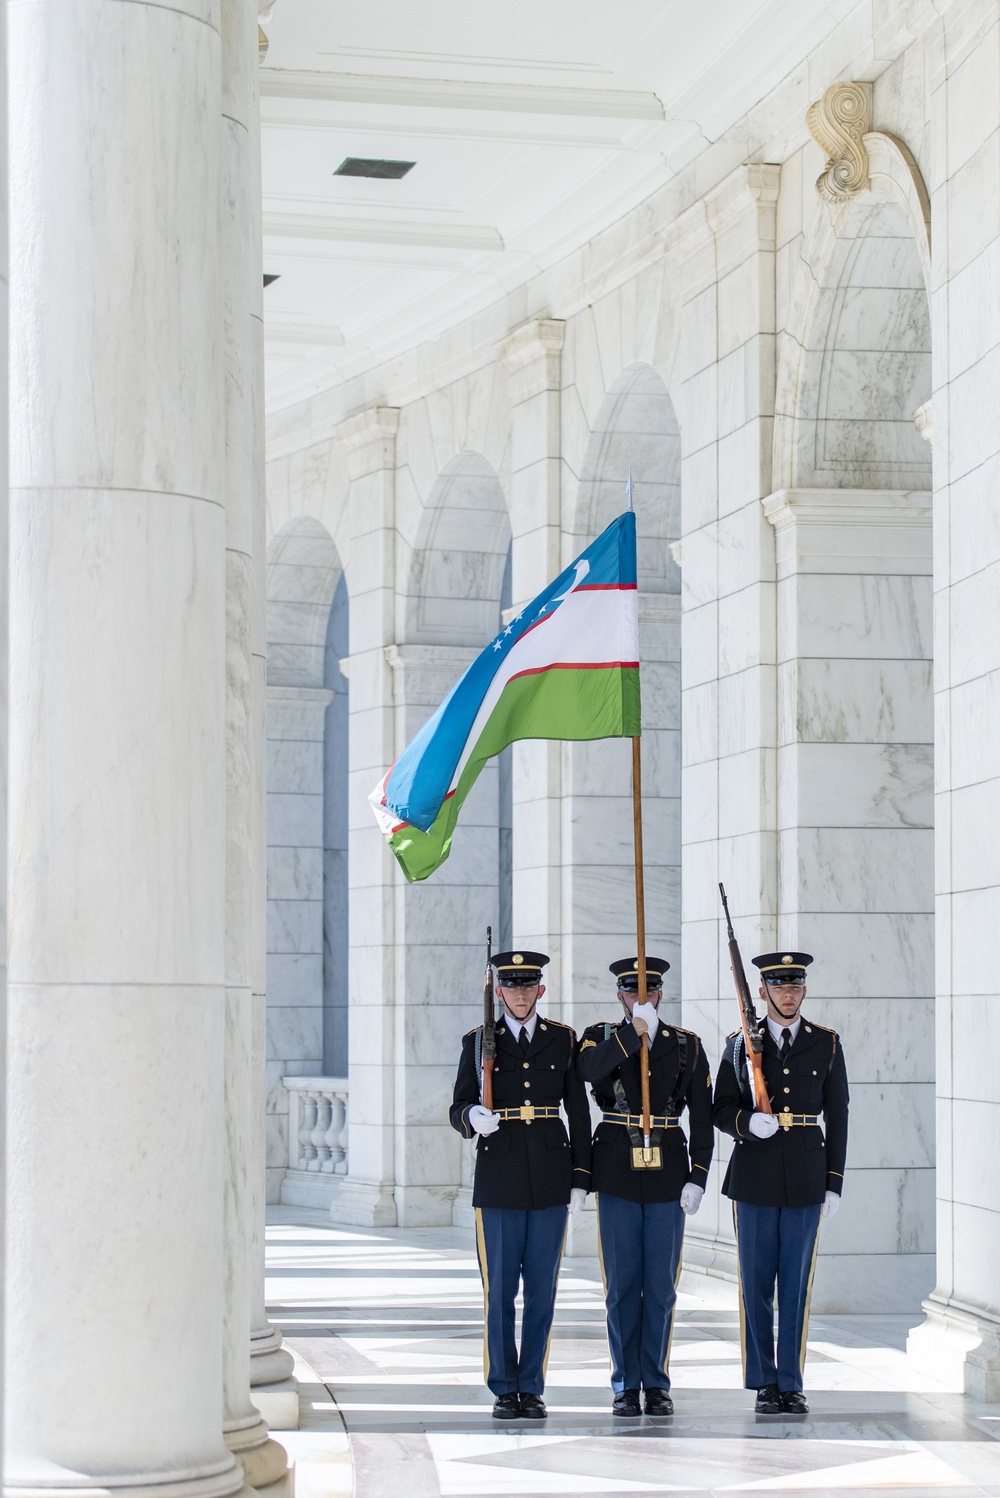 Uzbekistan Minister of Defense Maj. Gen. Bakhodir Kurbanov Participates in an Armed Forces Full Honors Wreath-Laying Ceremony at the Tomb of the Unknown Soldier